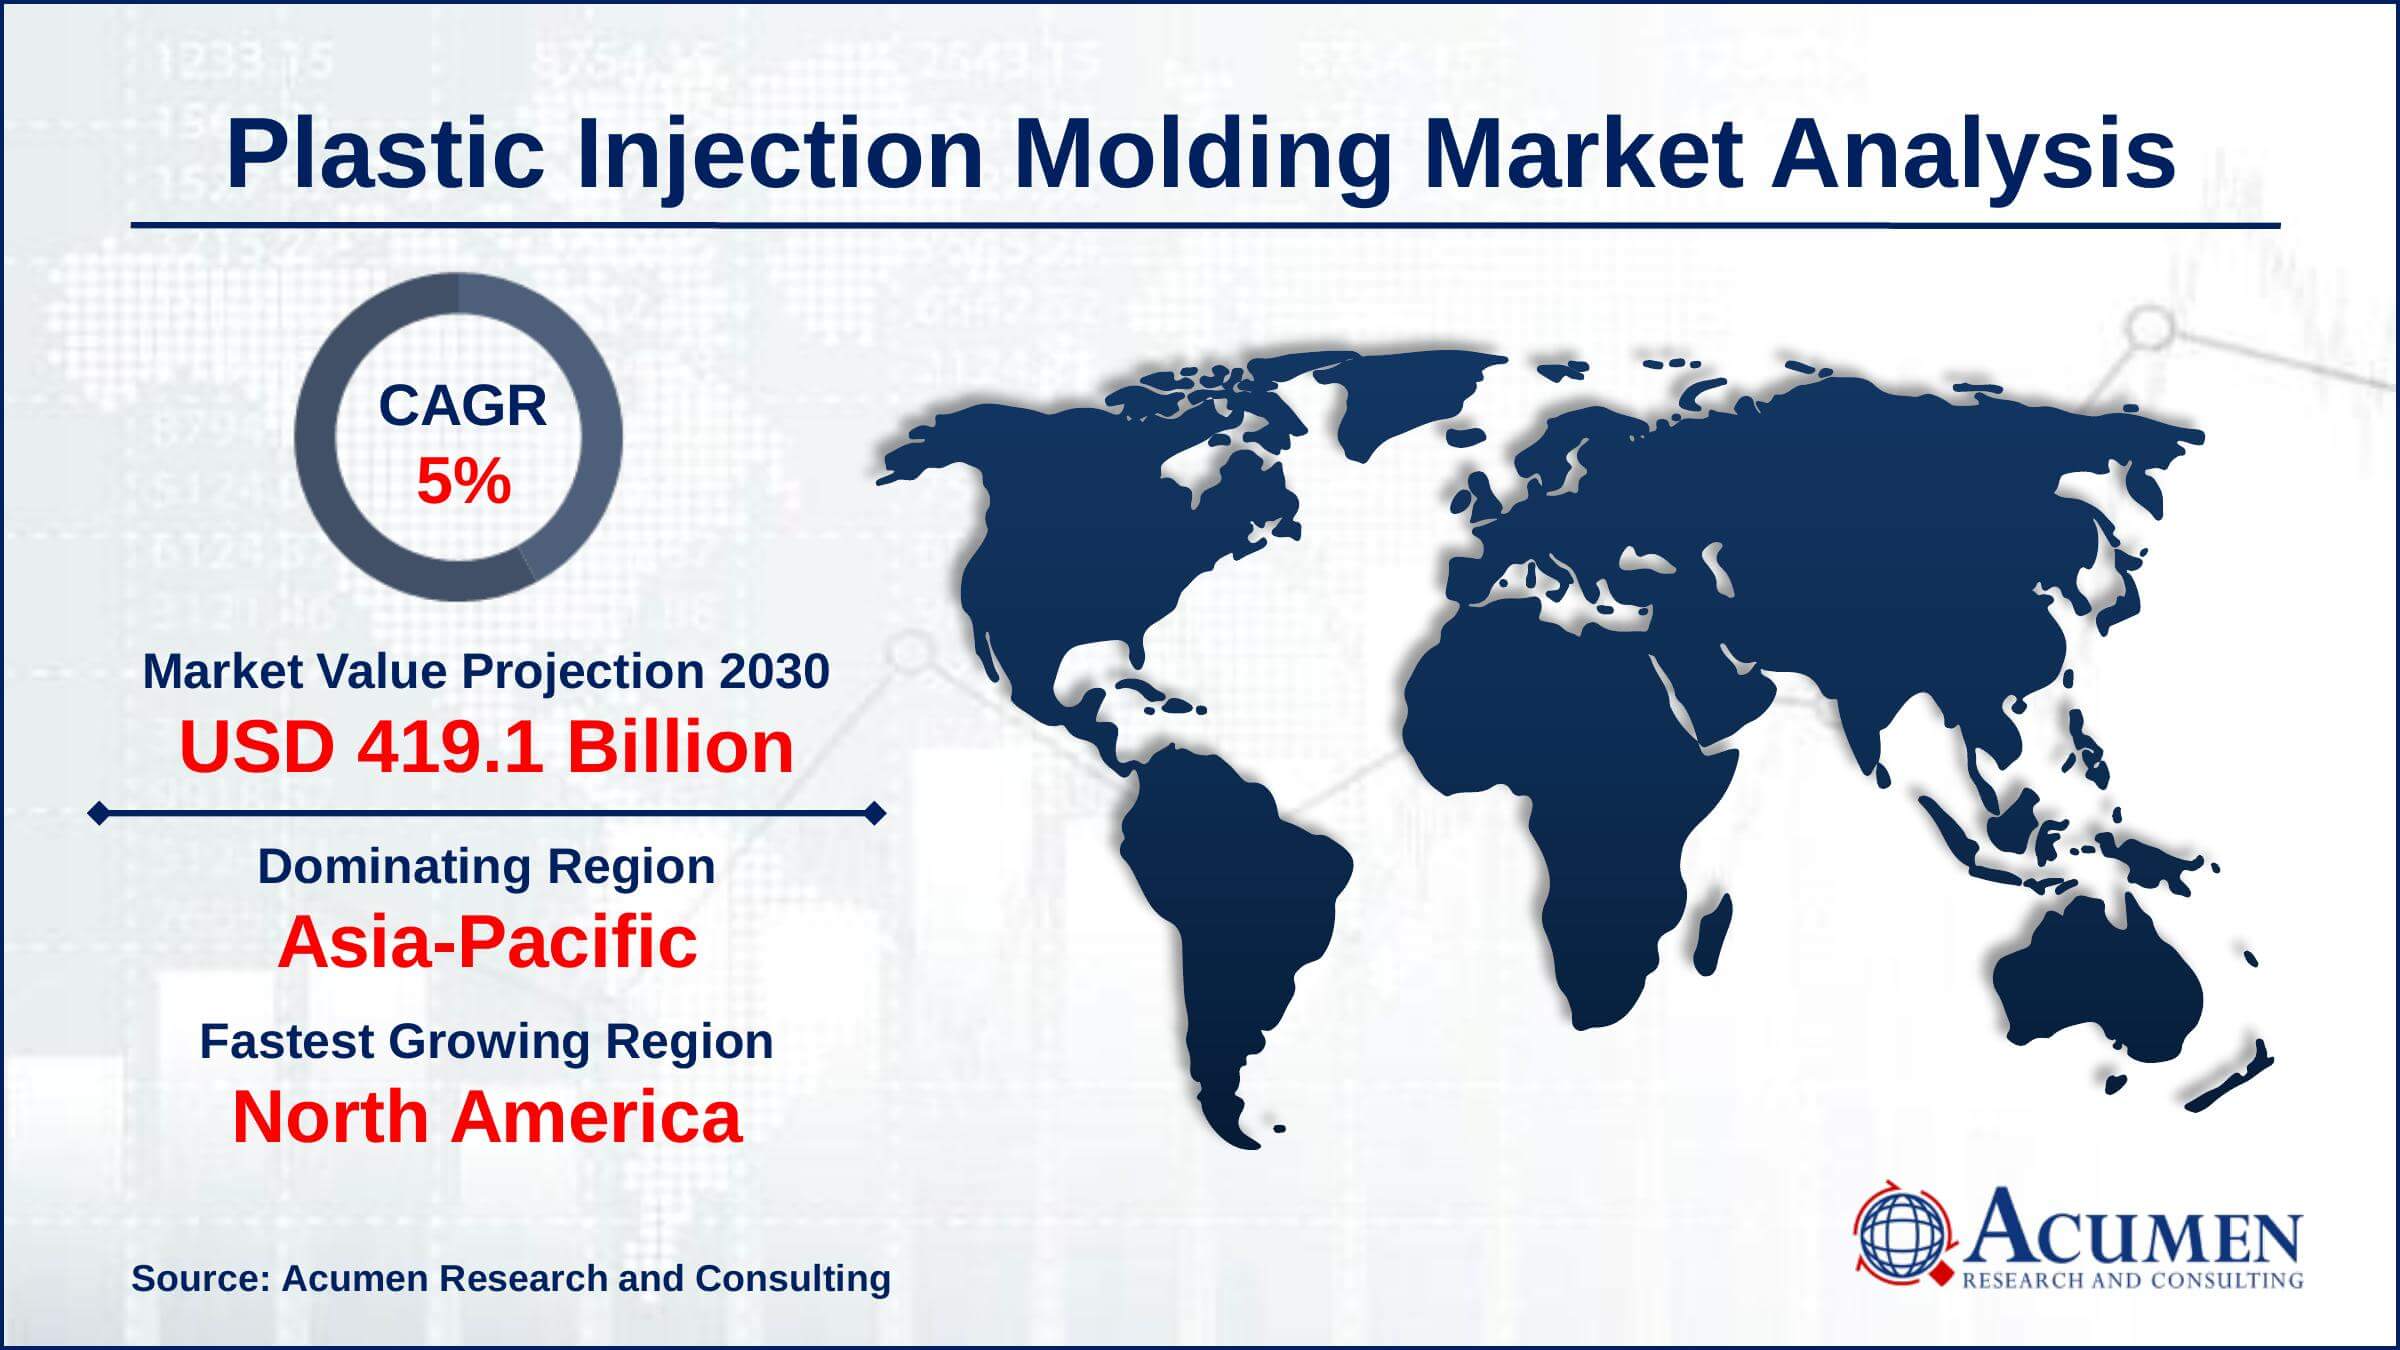 plastic injection molding market revenue is estimated to expand by USD 419.1 billion by 2030, with a 5% CAGR from 2022 to 2030.